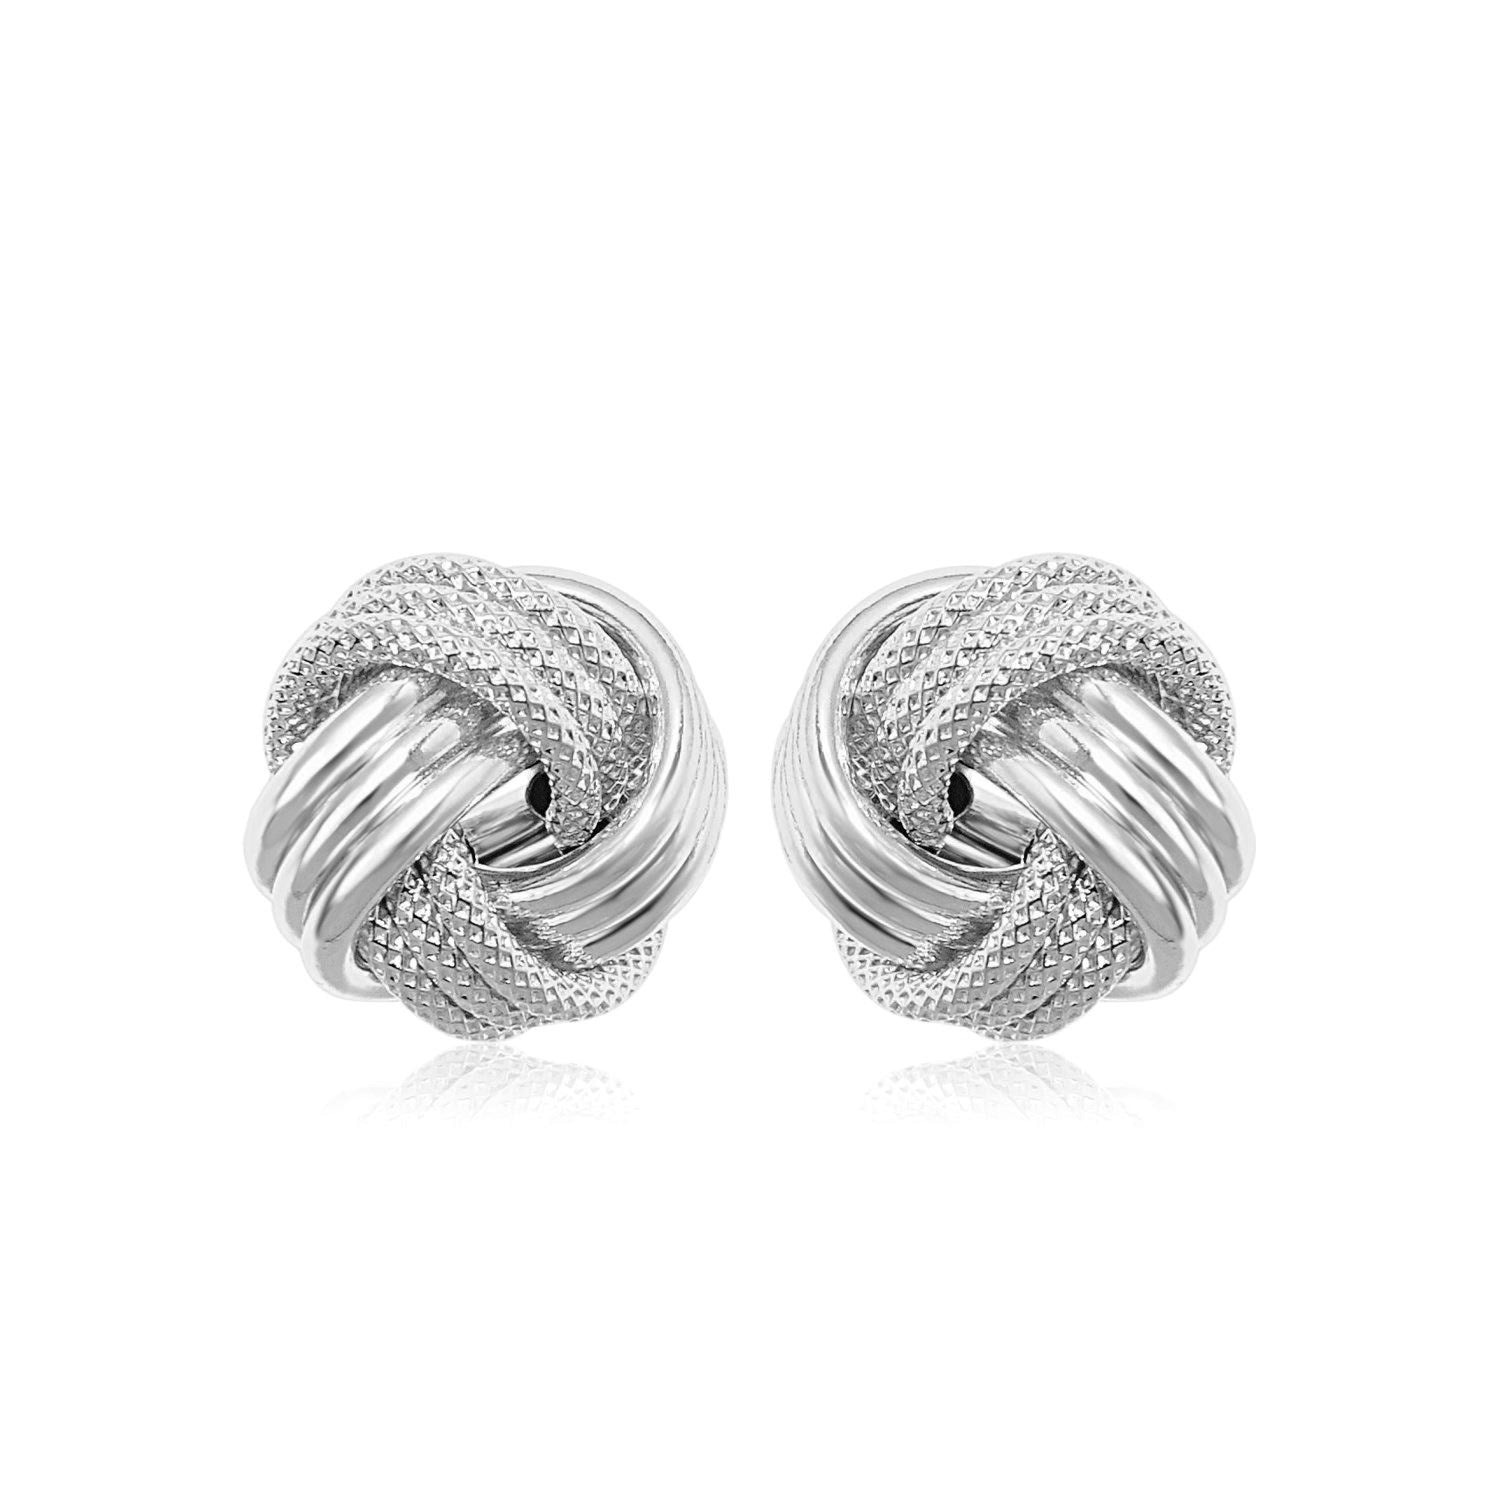 14k White Gold Love Knot with Ridge Texture Earrings